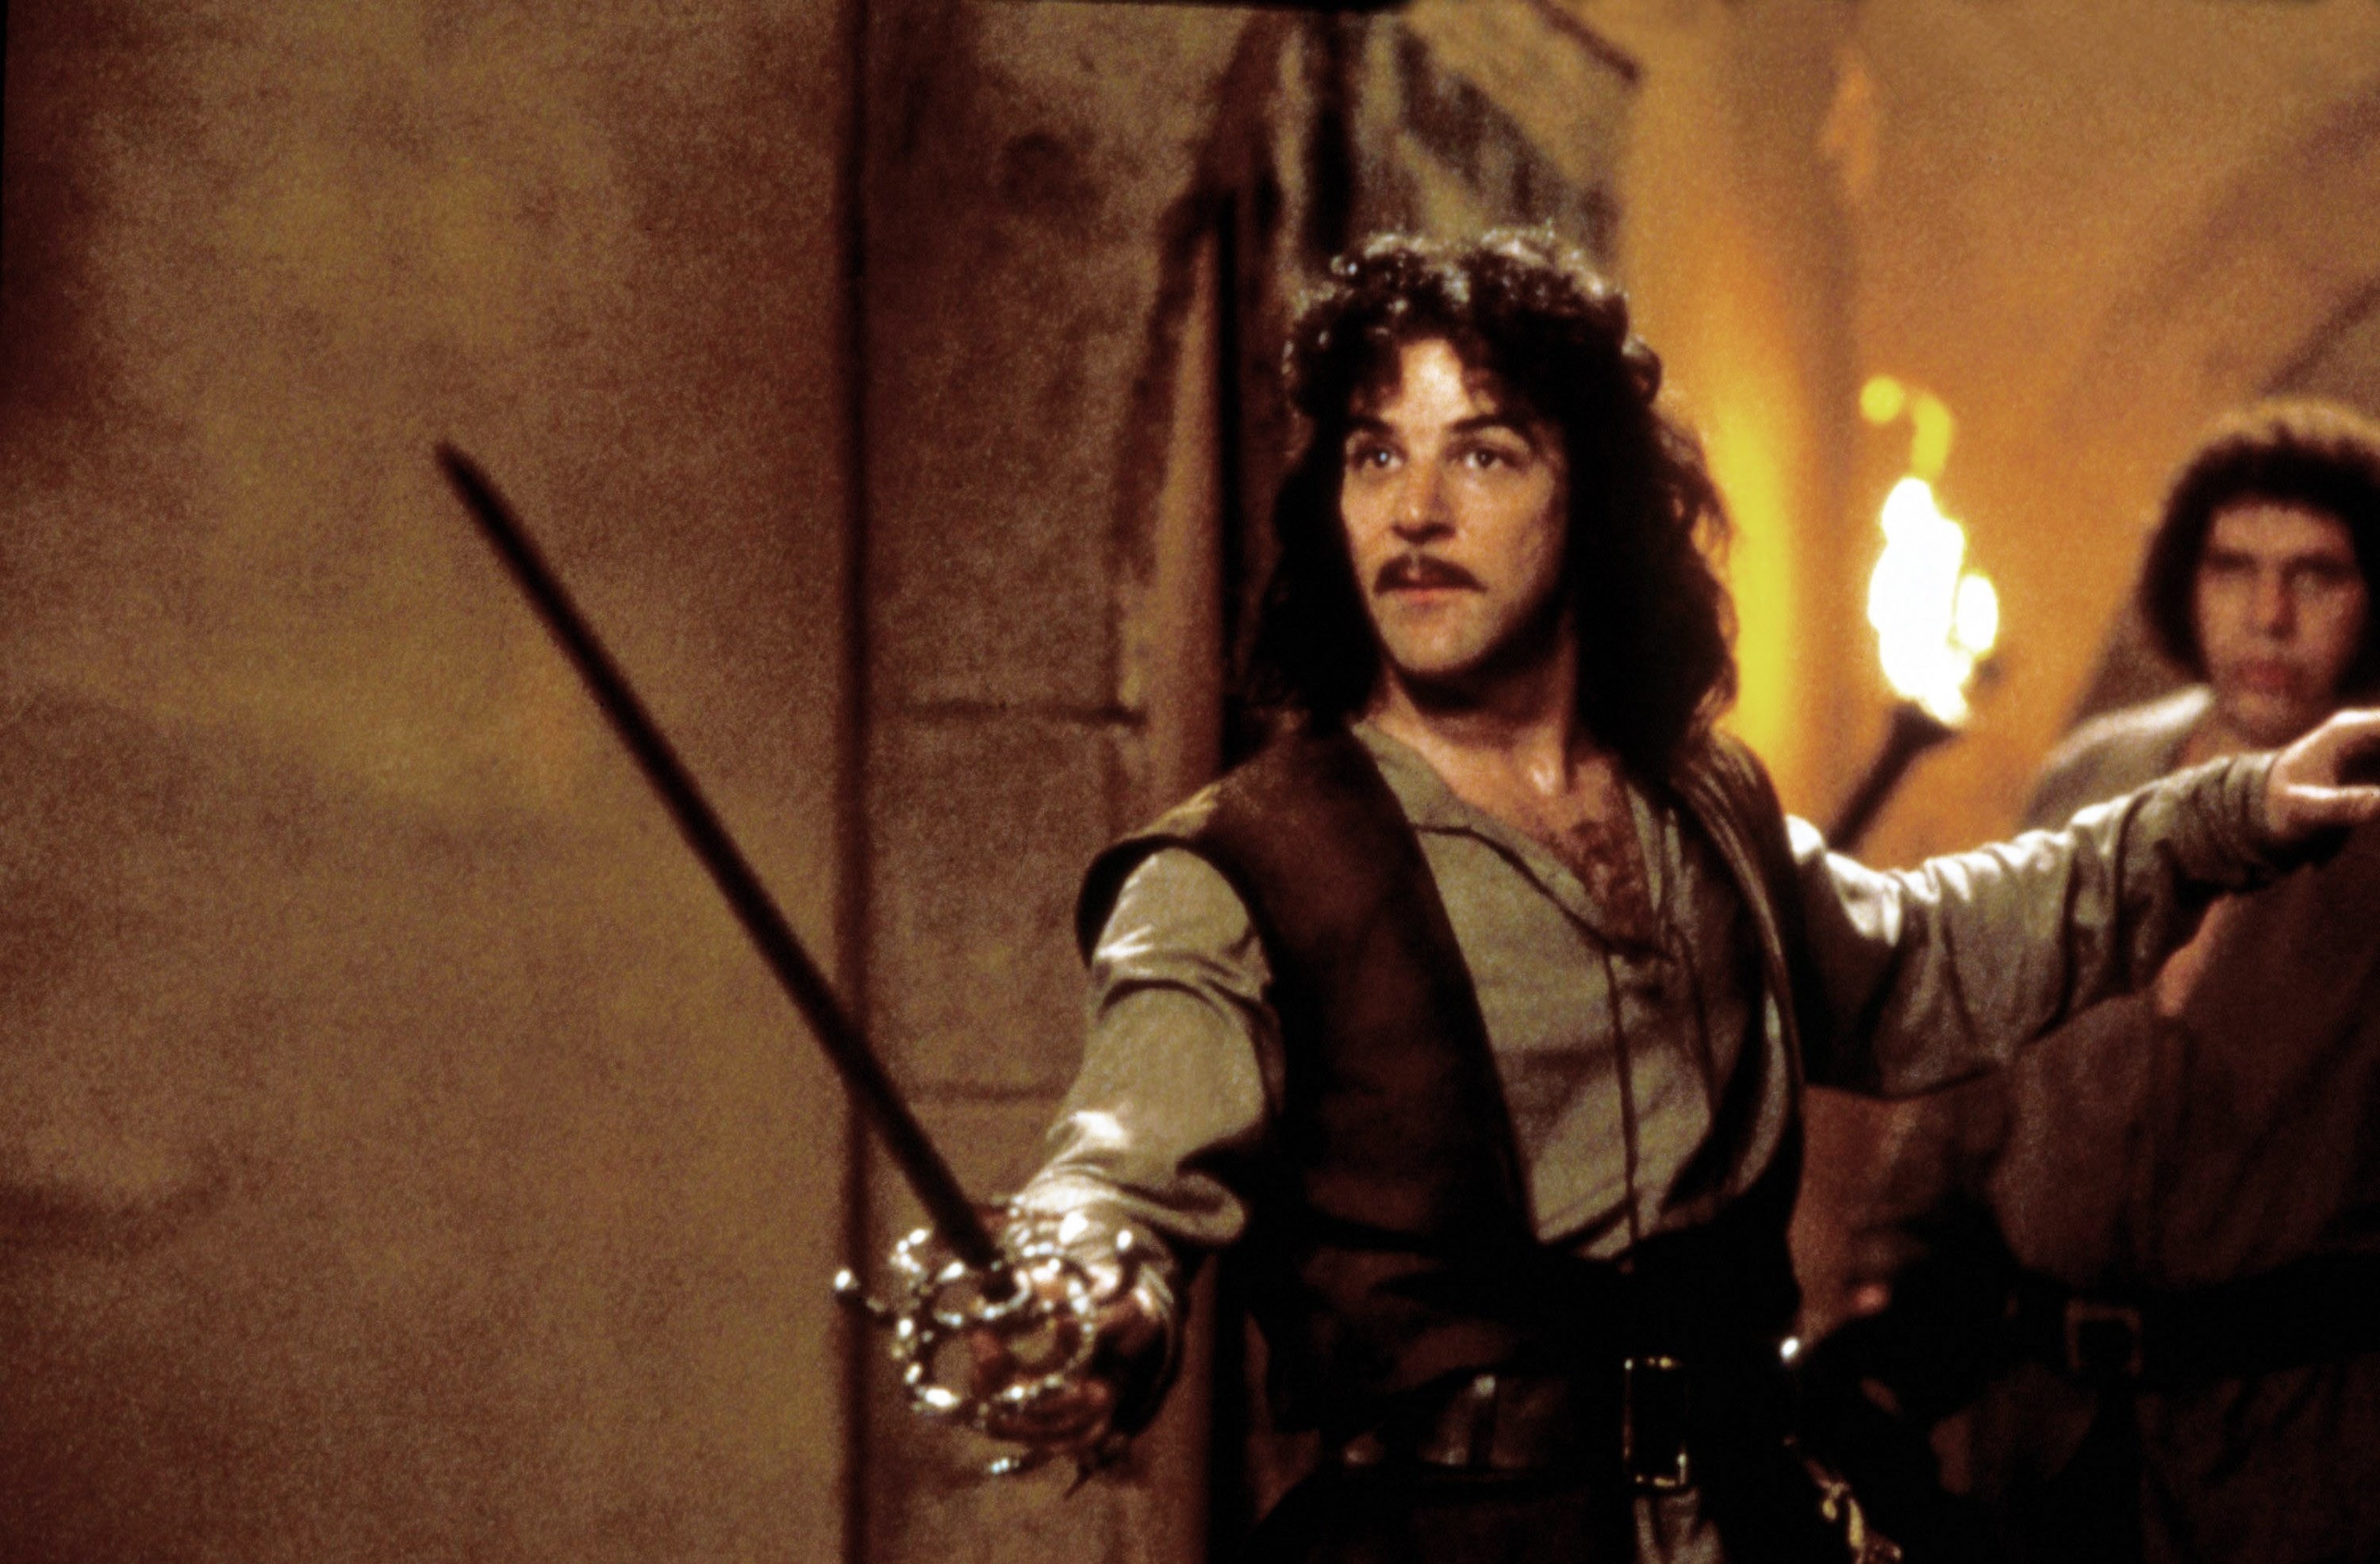 Mandy Patkin holding up a sword to fight